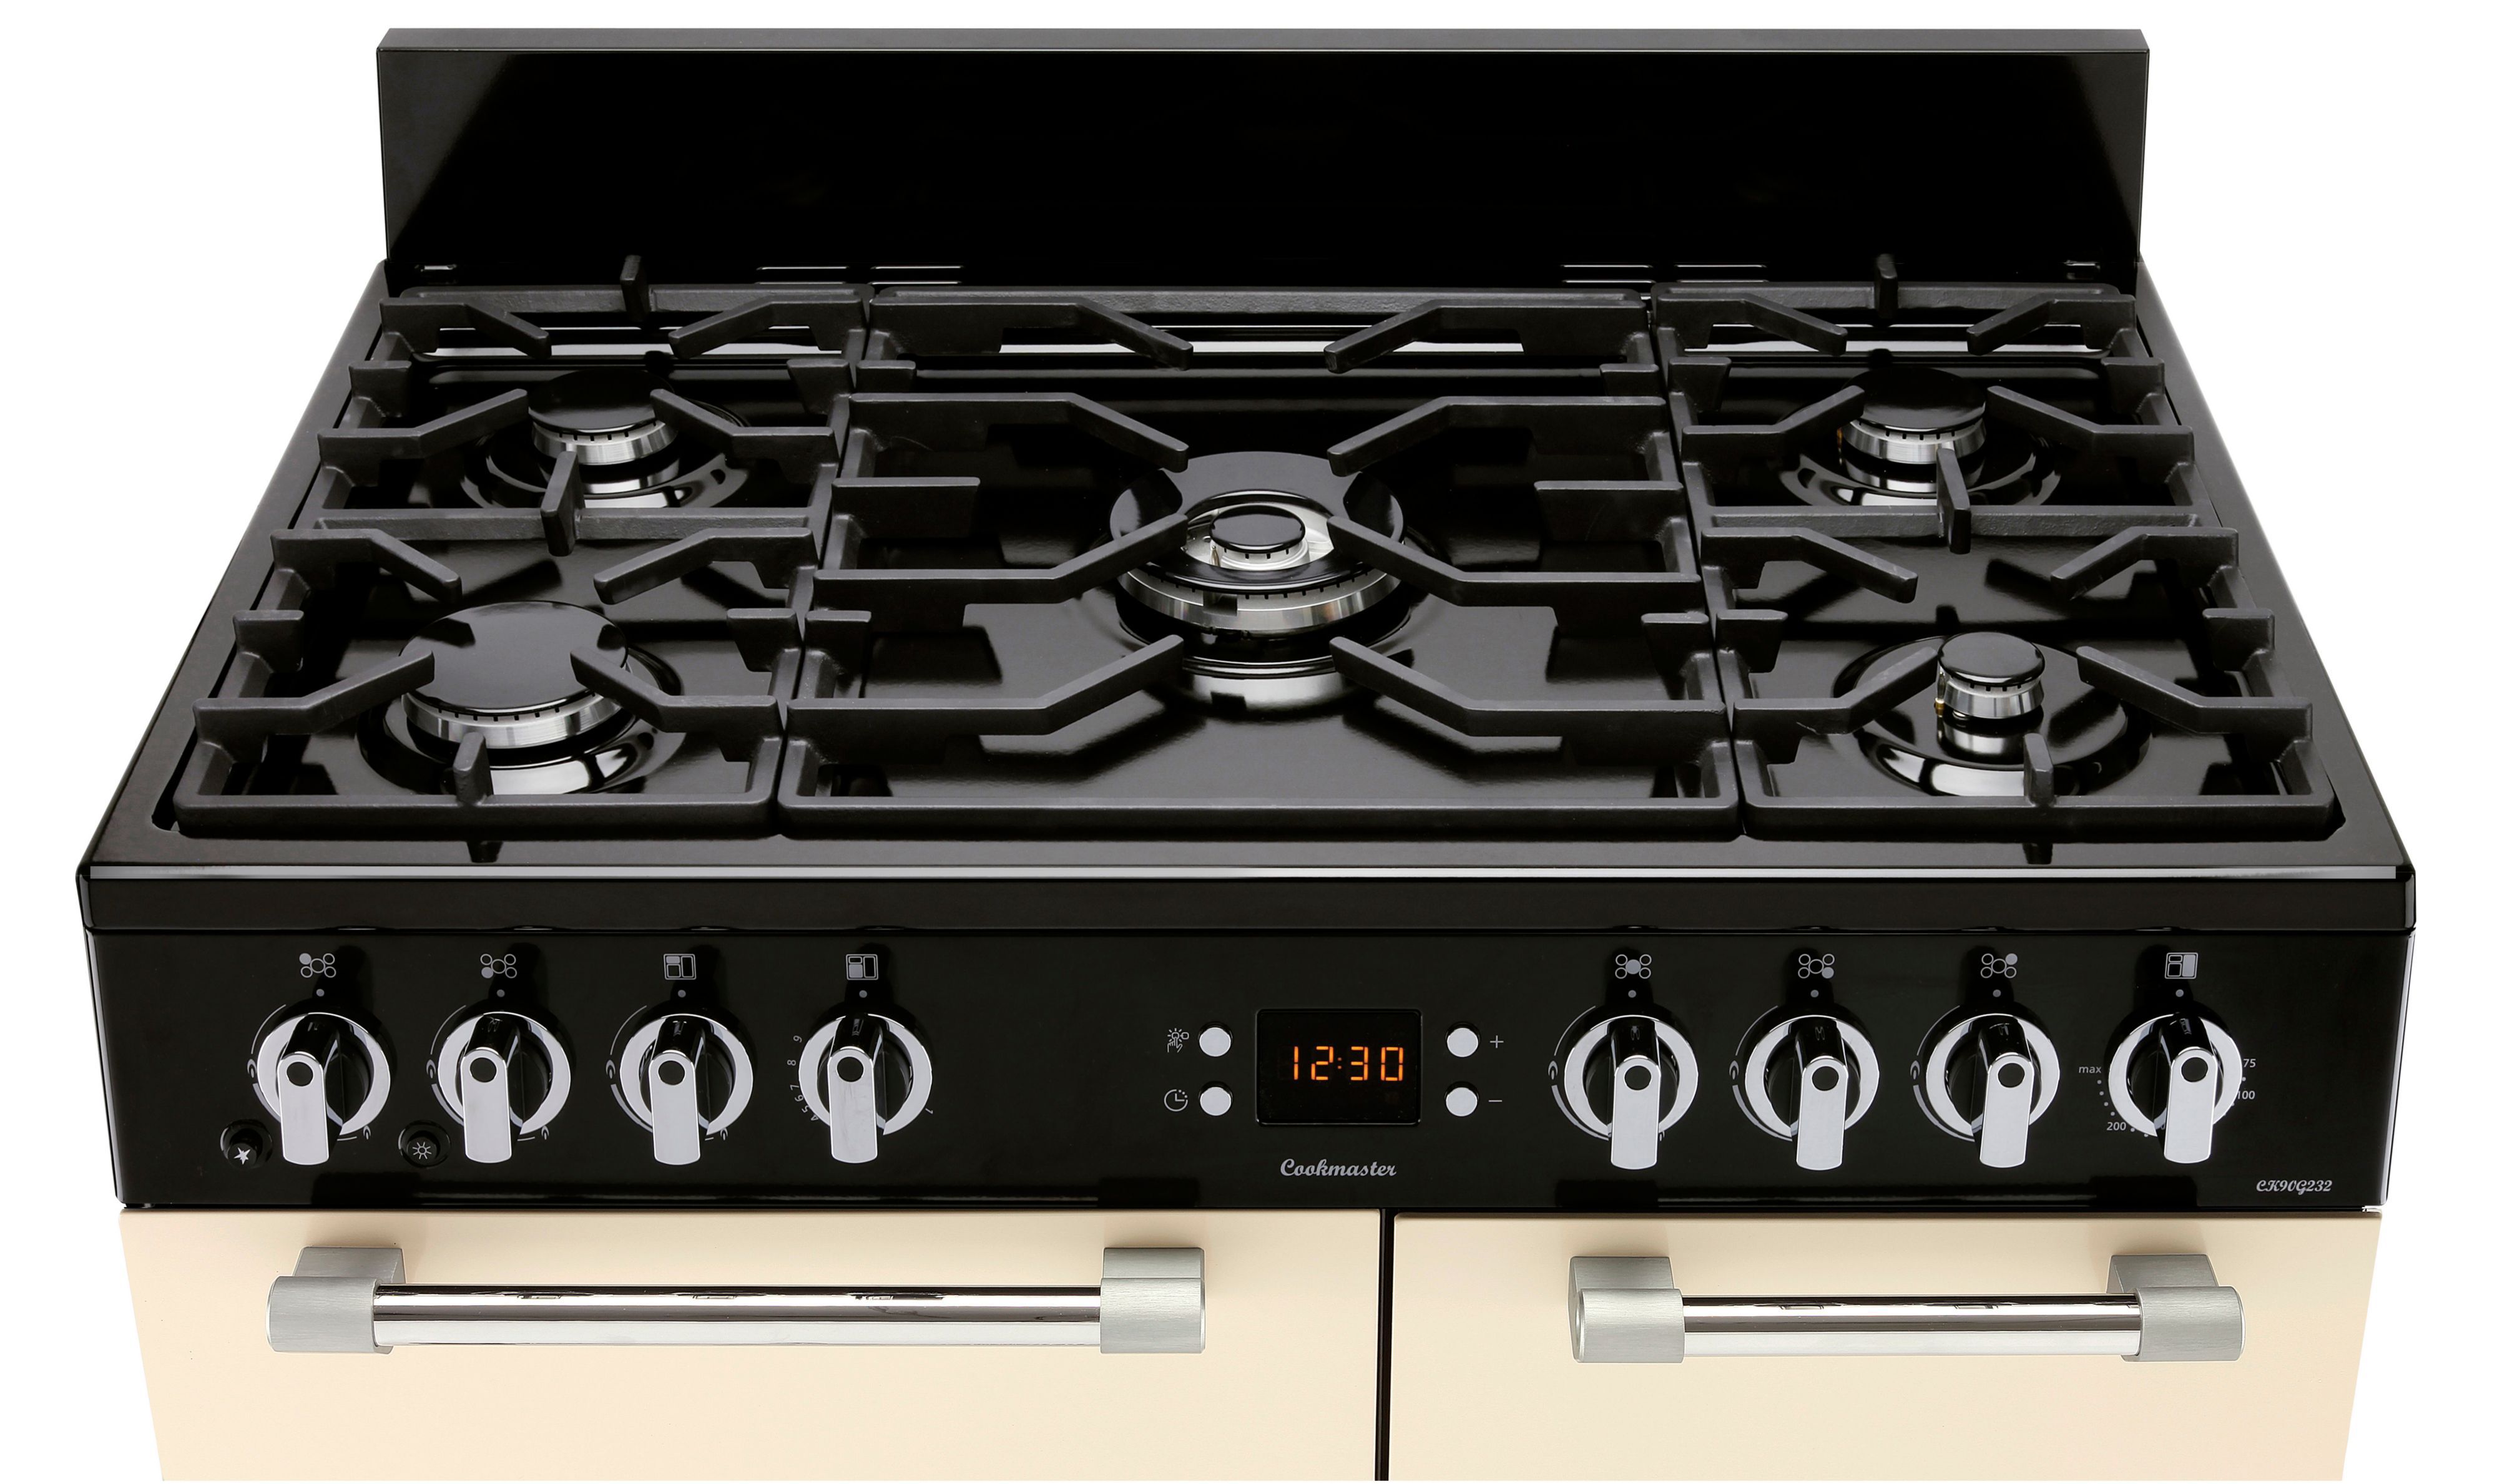 Leisure CK90G232C Freestanding Gas Range cooker with Gas Hob